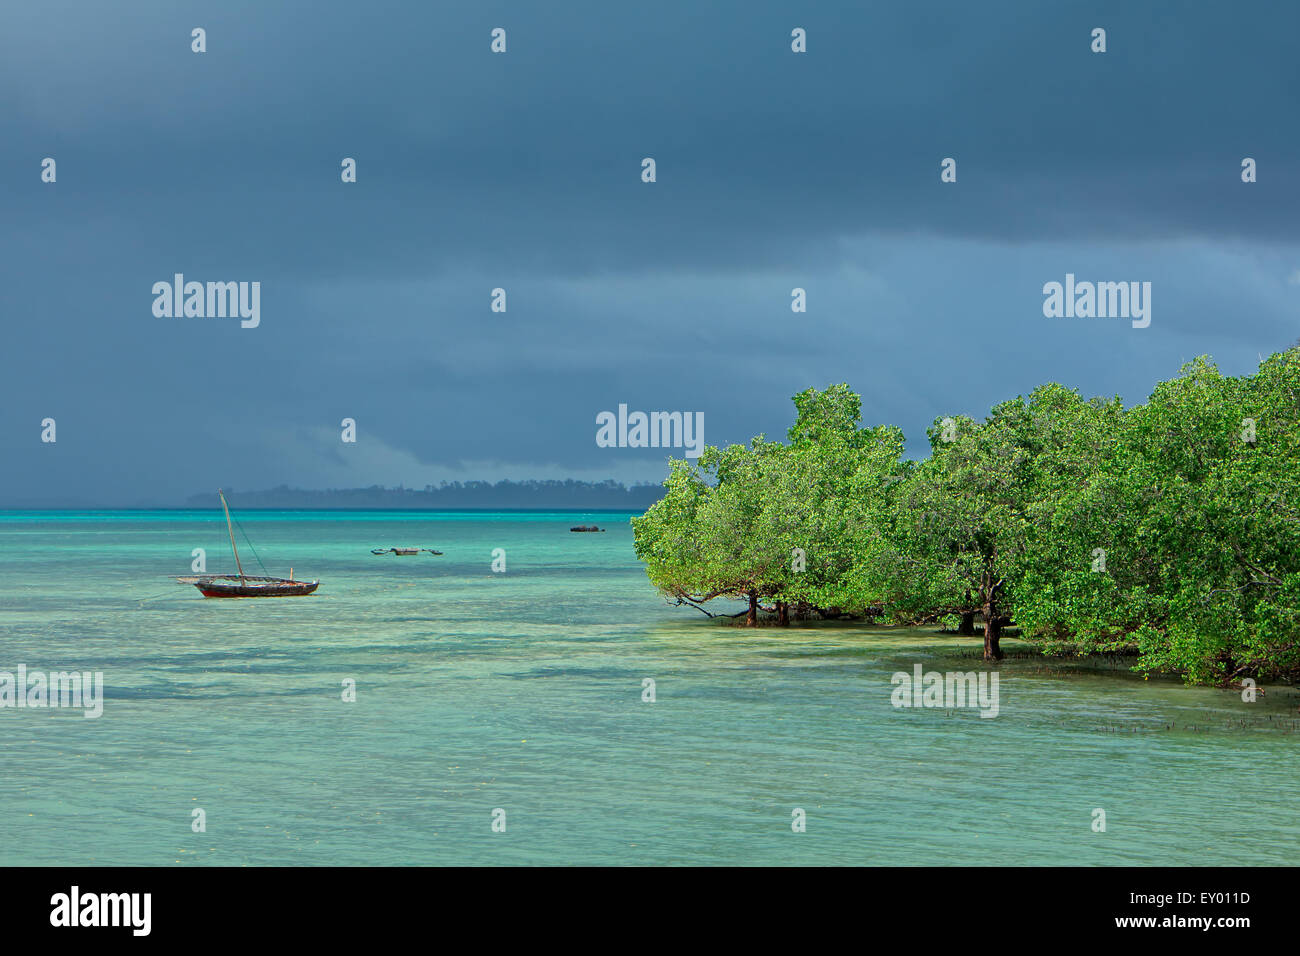 Seascape with mangrove trees and dhows on the tropical coast of Zanzibar island Stock Photo